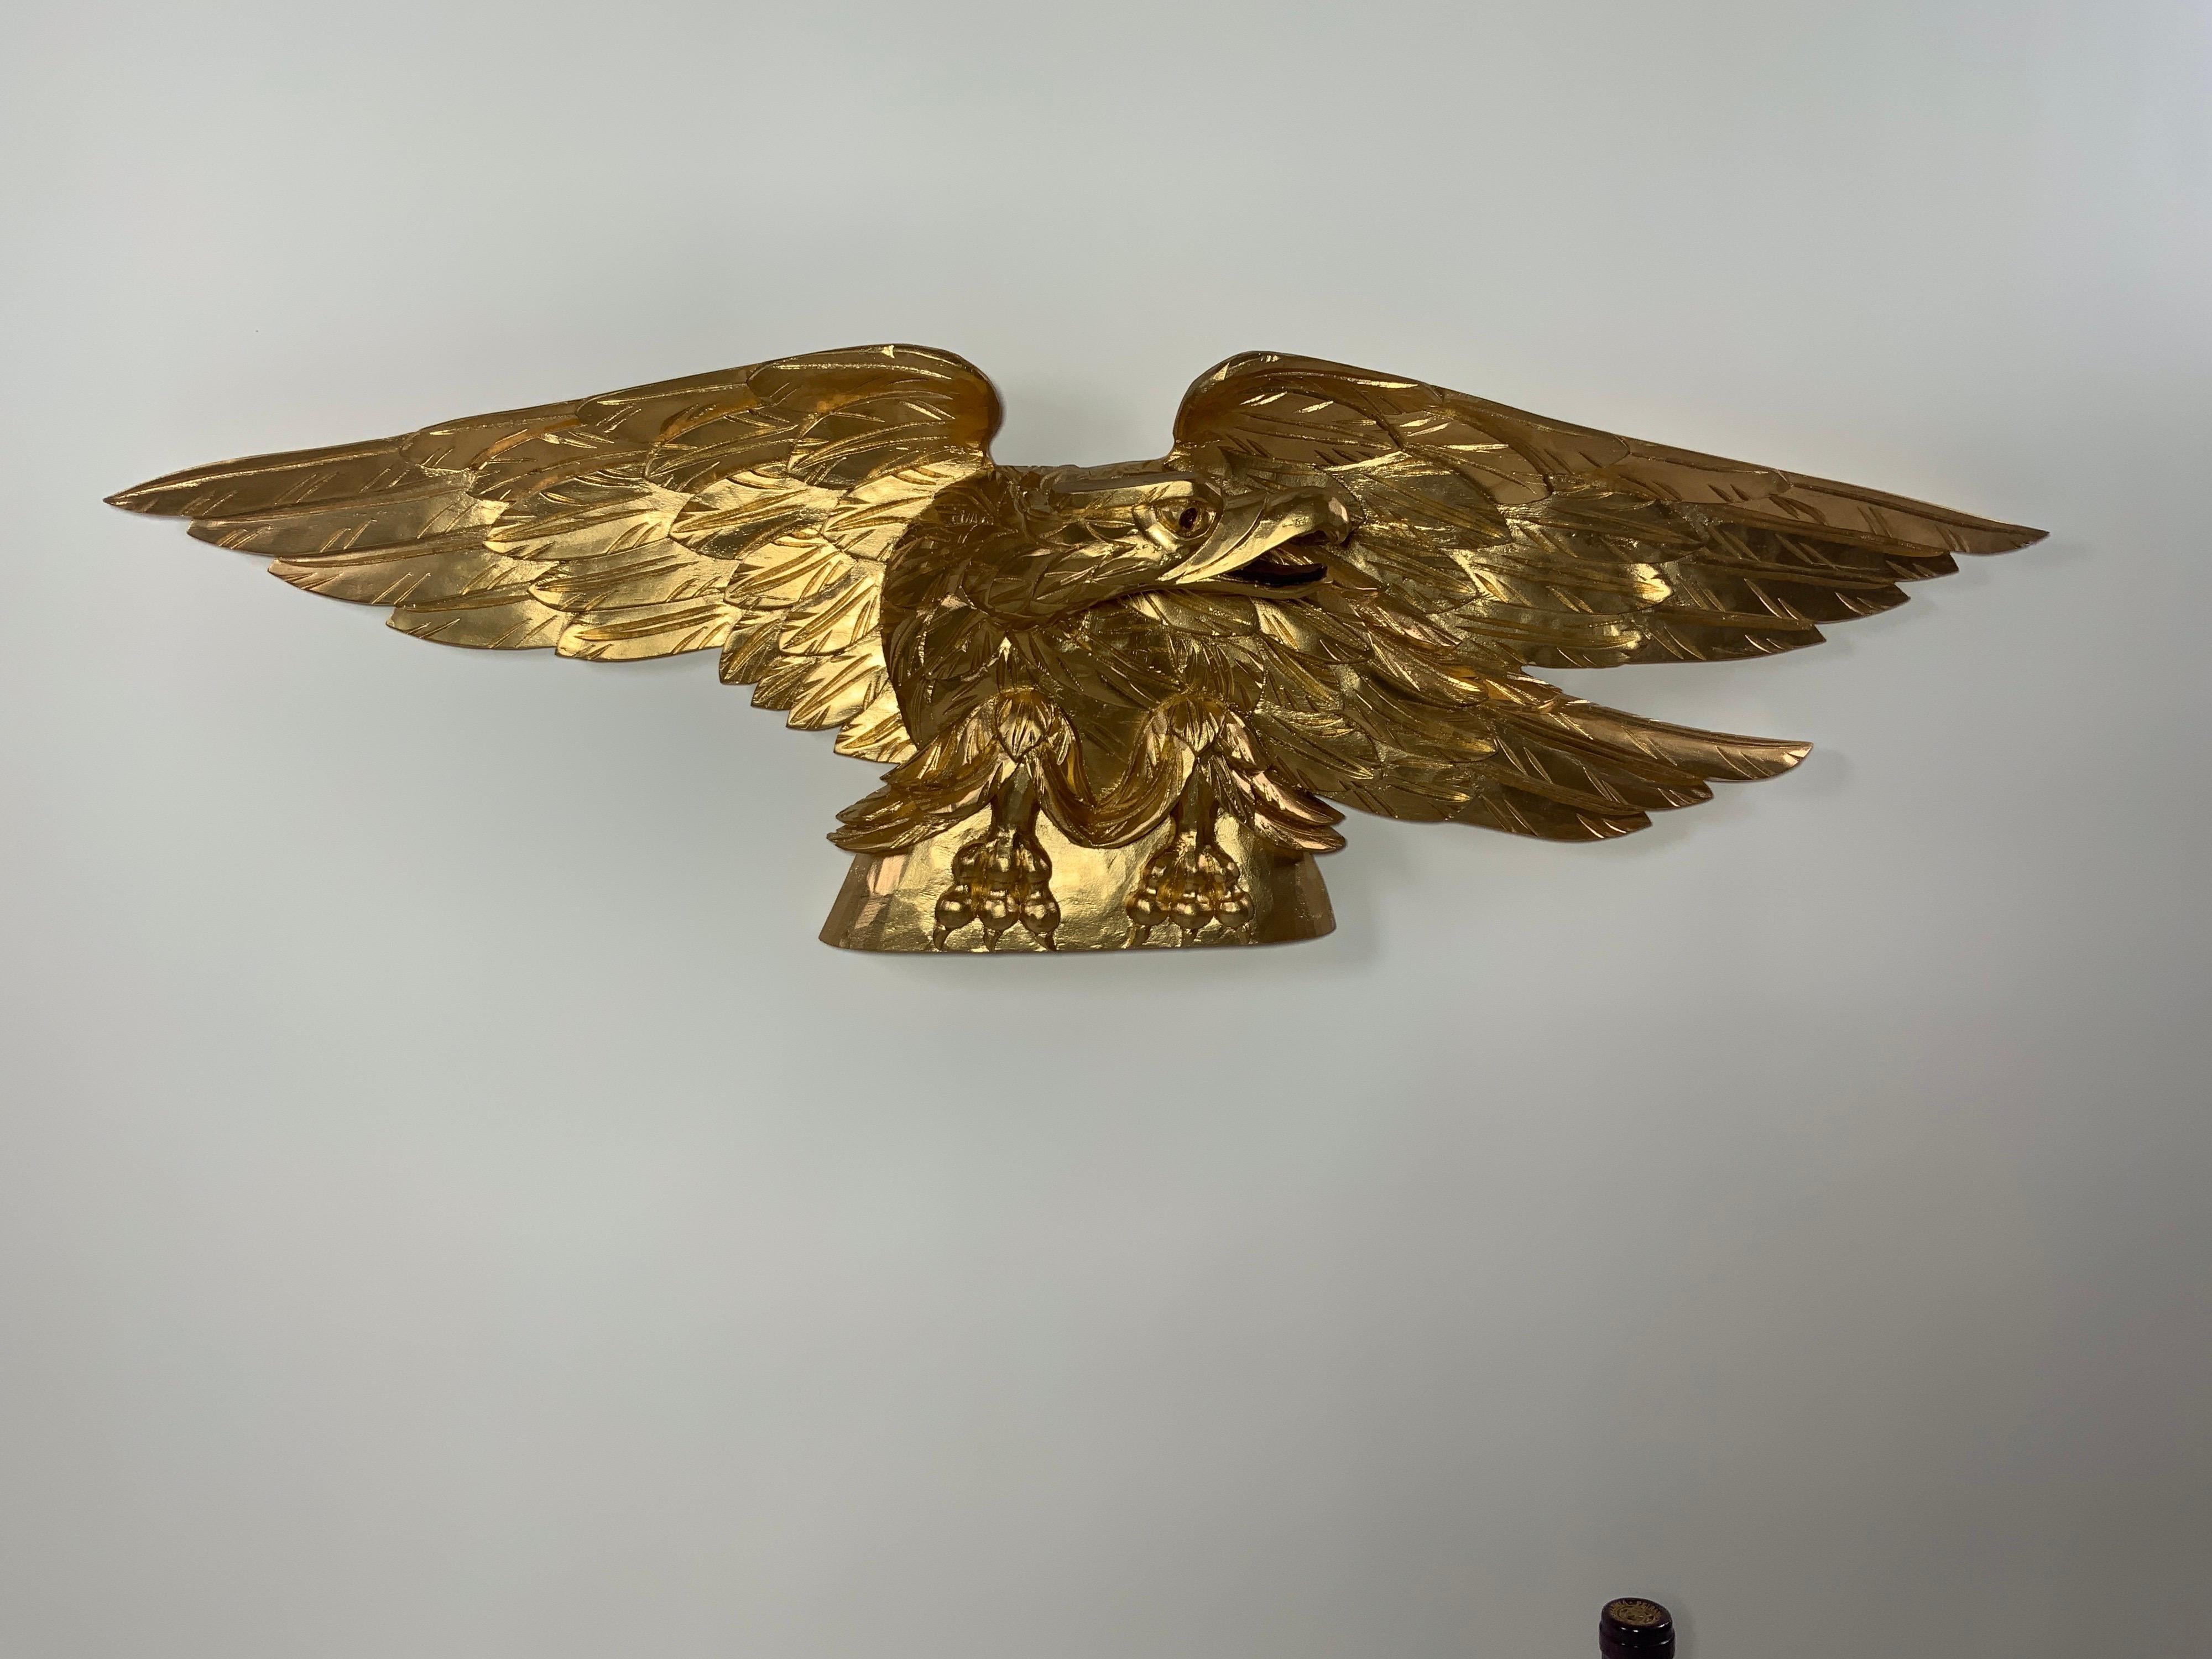 Carved eagle with pediment base. Heavily carved wings. Expertly executed. Flat bottom. Can be displayed on a mantle, over a door, or hung. Gold painted painted finish.

Overall dimensions: 11